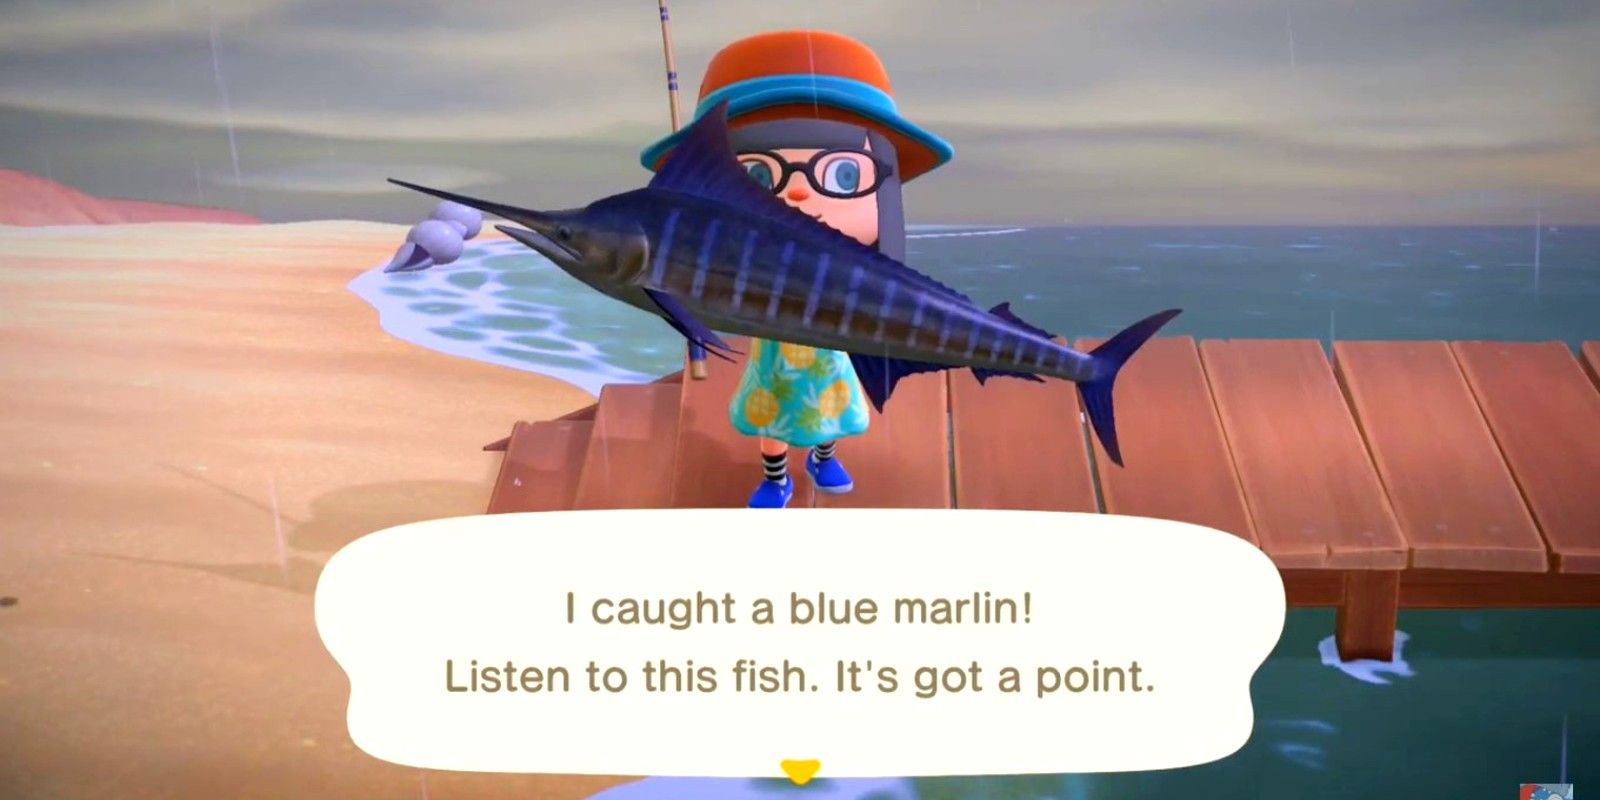 A player catches a Blue Marlin from the pier of her island in the rain in Animal Crossing: New Horizons